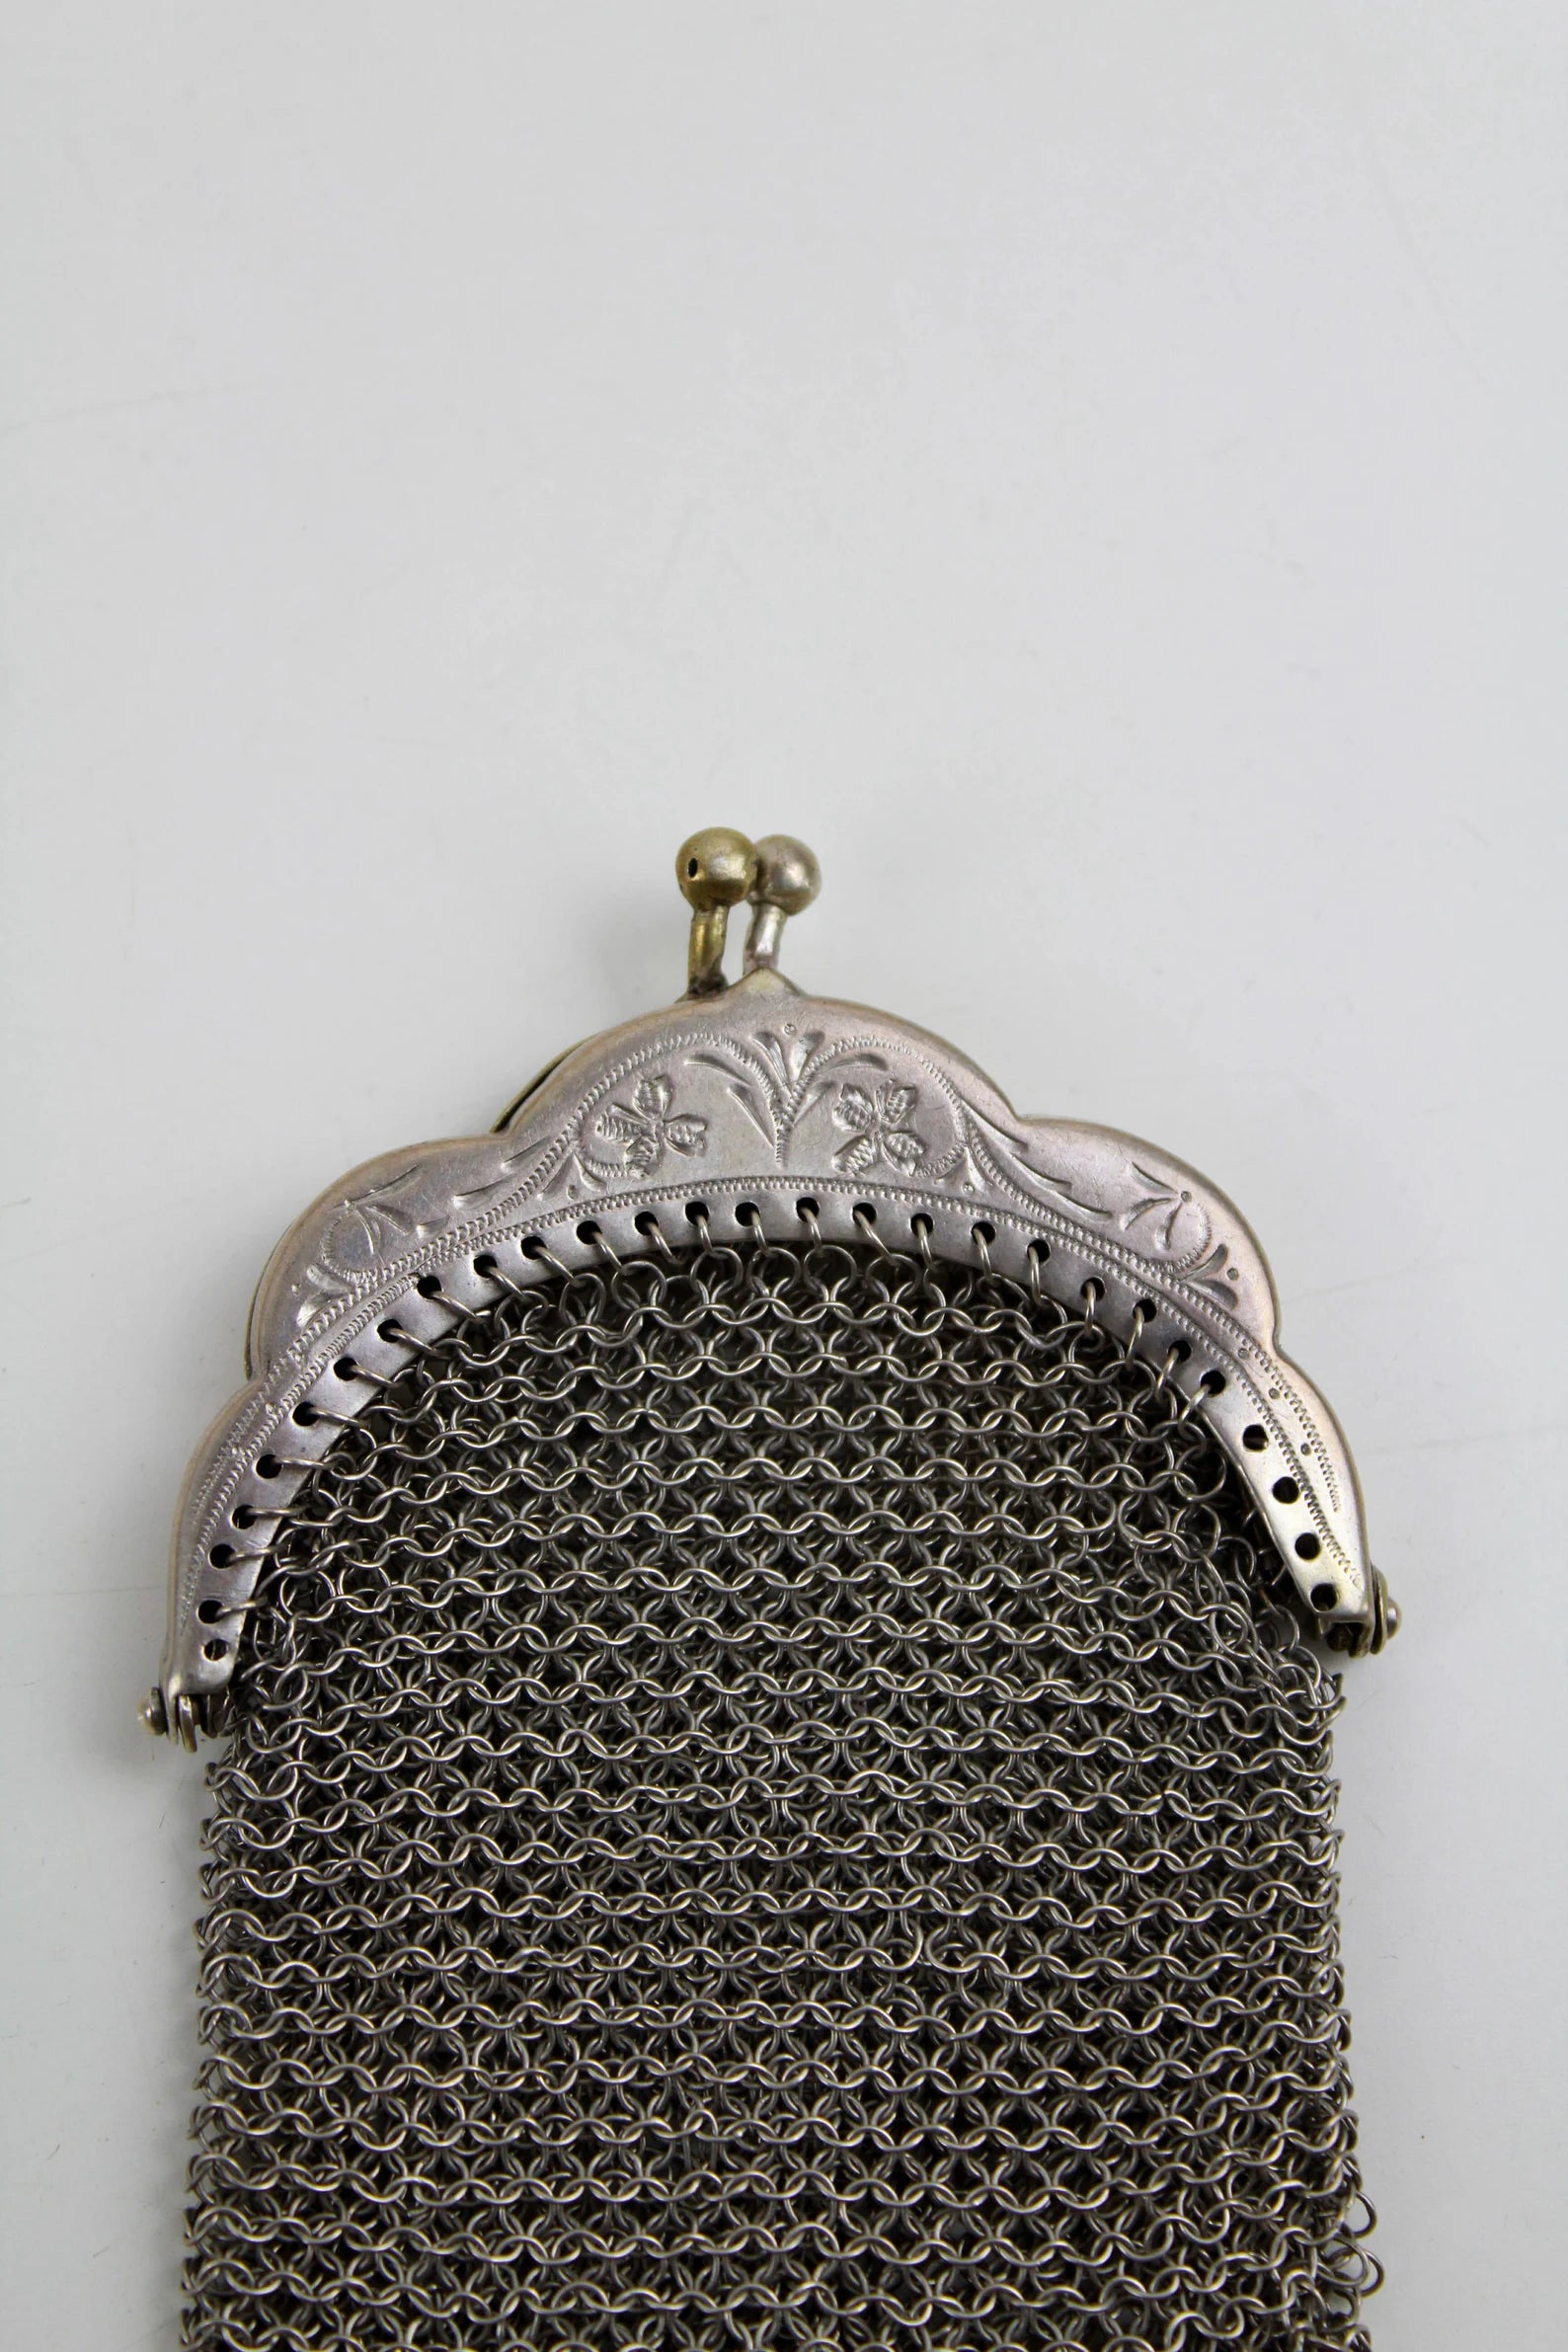 Sold at Auction: ANTIQUE ENGRAVE STERLING SILVER ROUND COIN PURSE